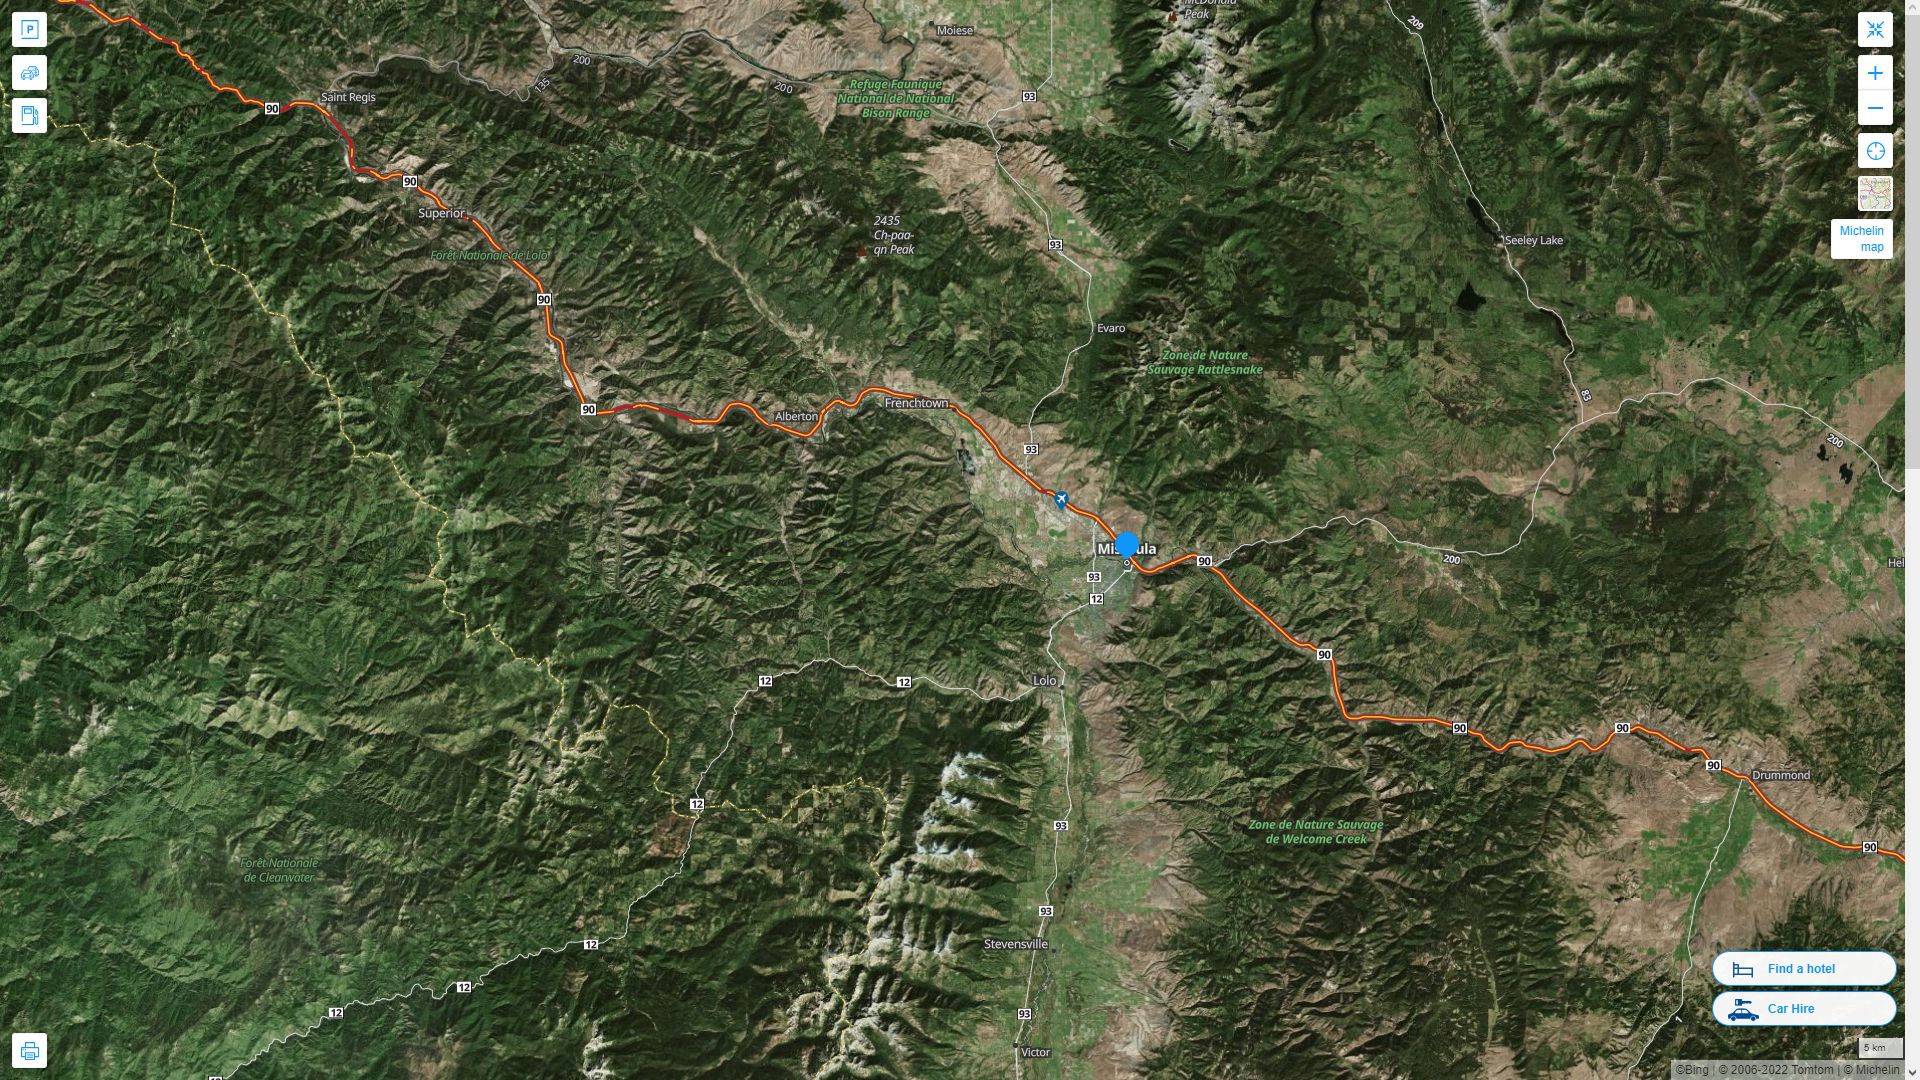 Missoula Montana Highway and Road Map with Satellite View